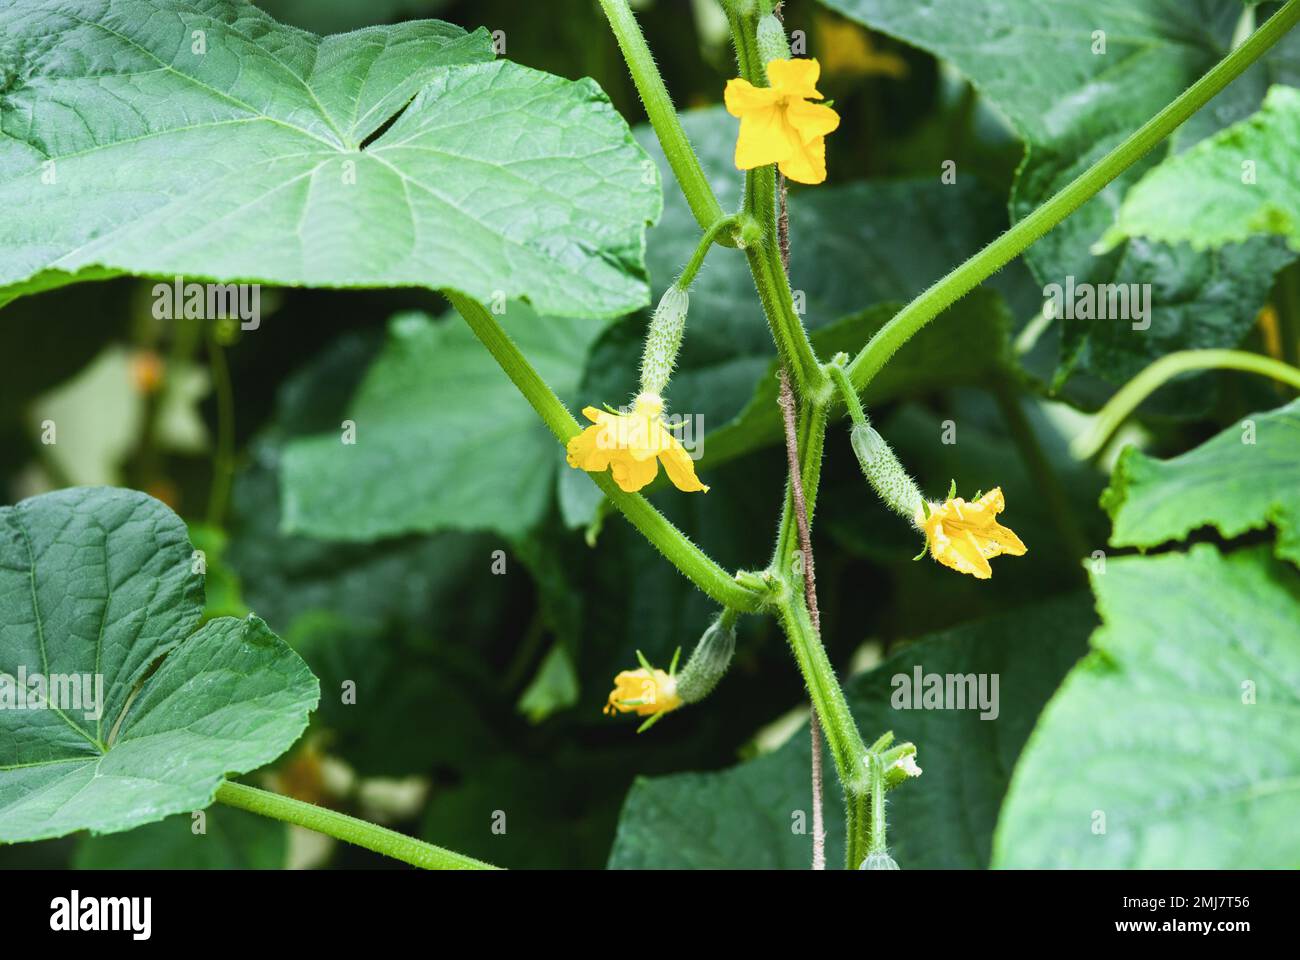 Cucumber plant vine with kukes and flowers in greenhouse Stock Photo